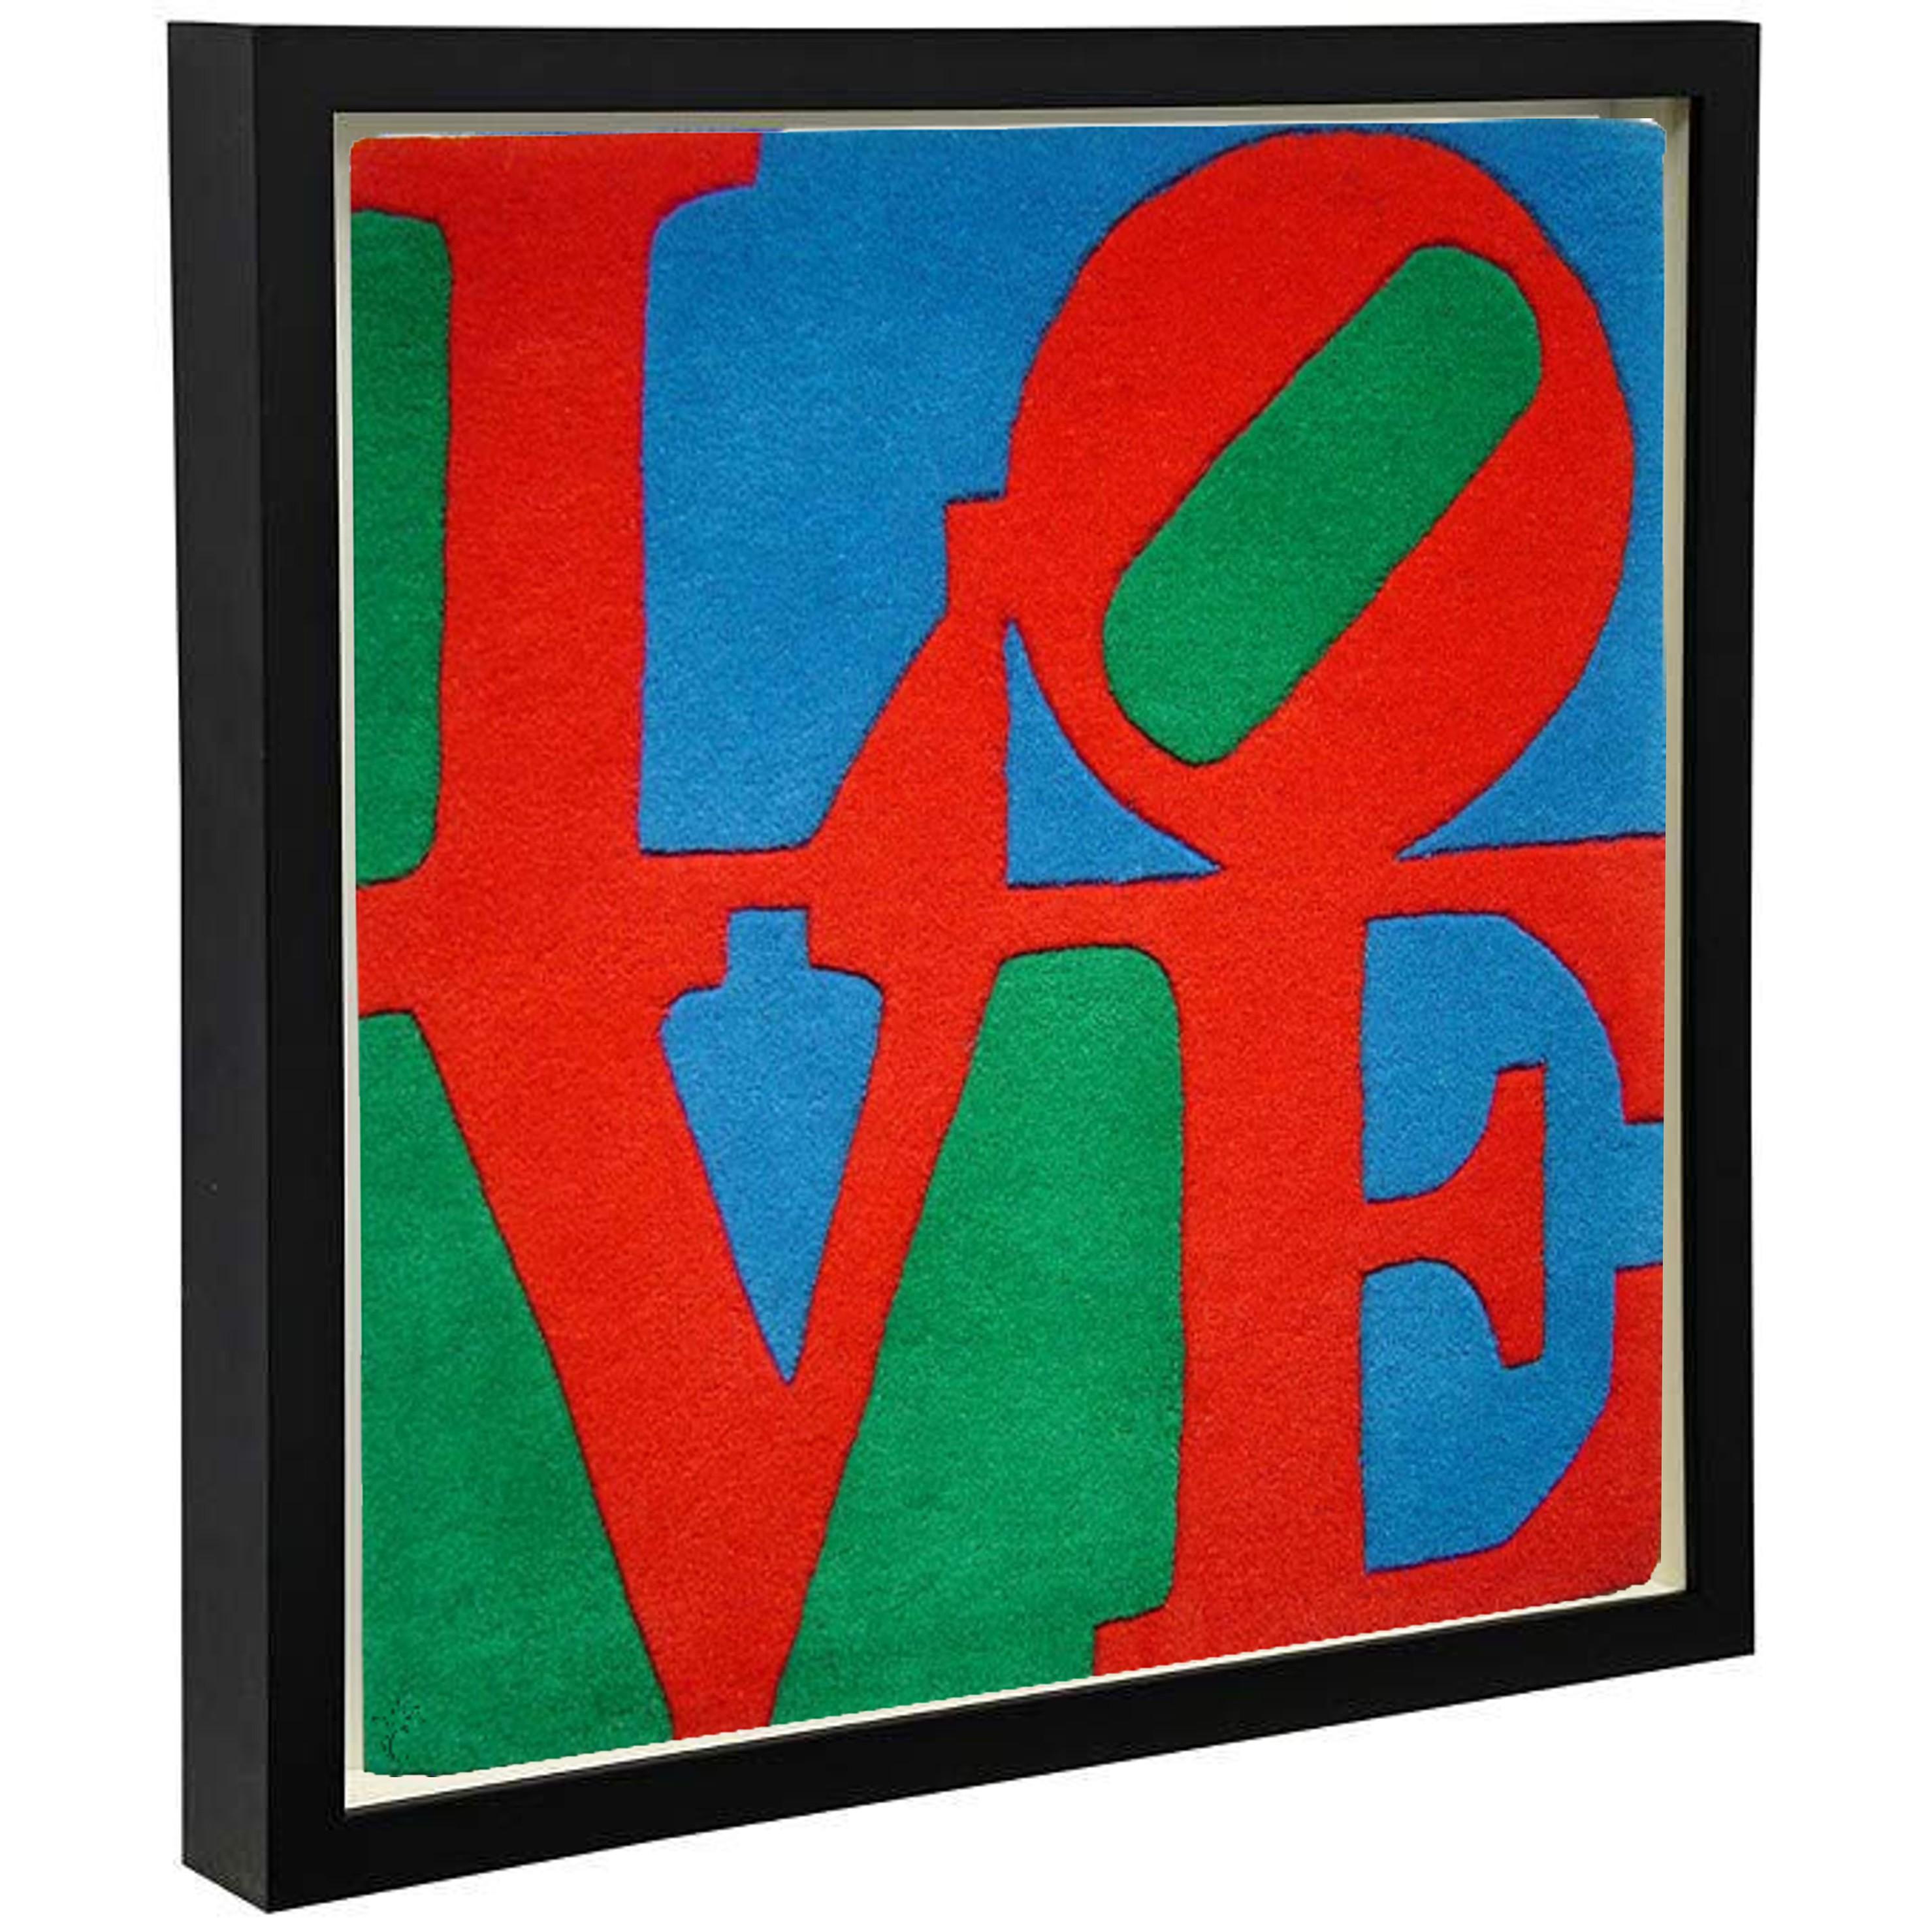 Classic LOVE (Pop Art, Modern, Neo-Dada, Iconography, Tuft, Framed - LARGE!) - Print by Robert Indiana